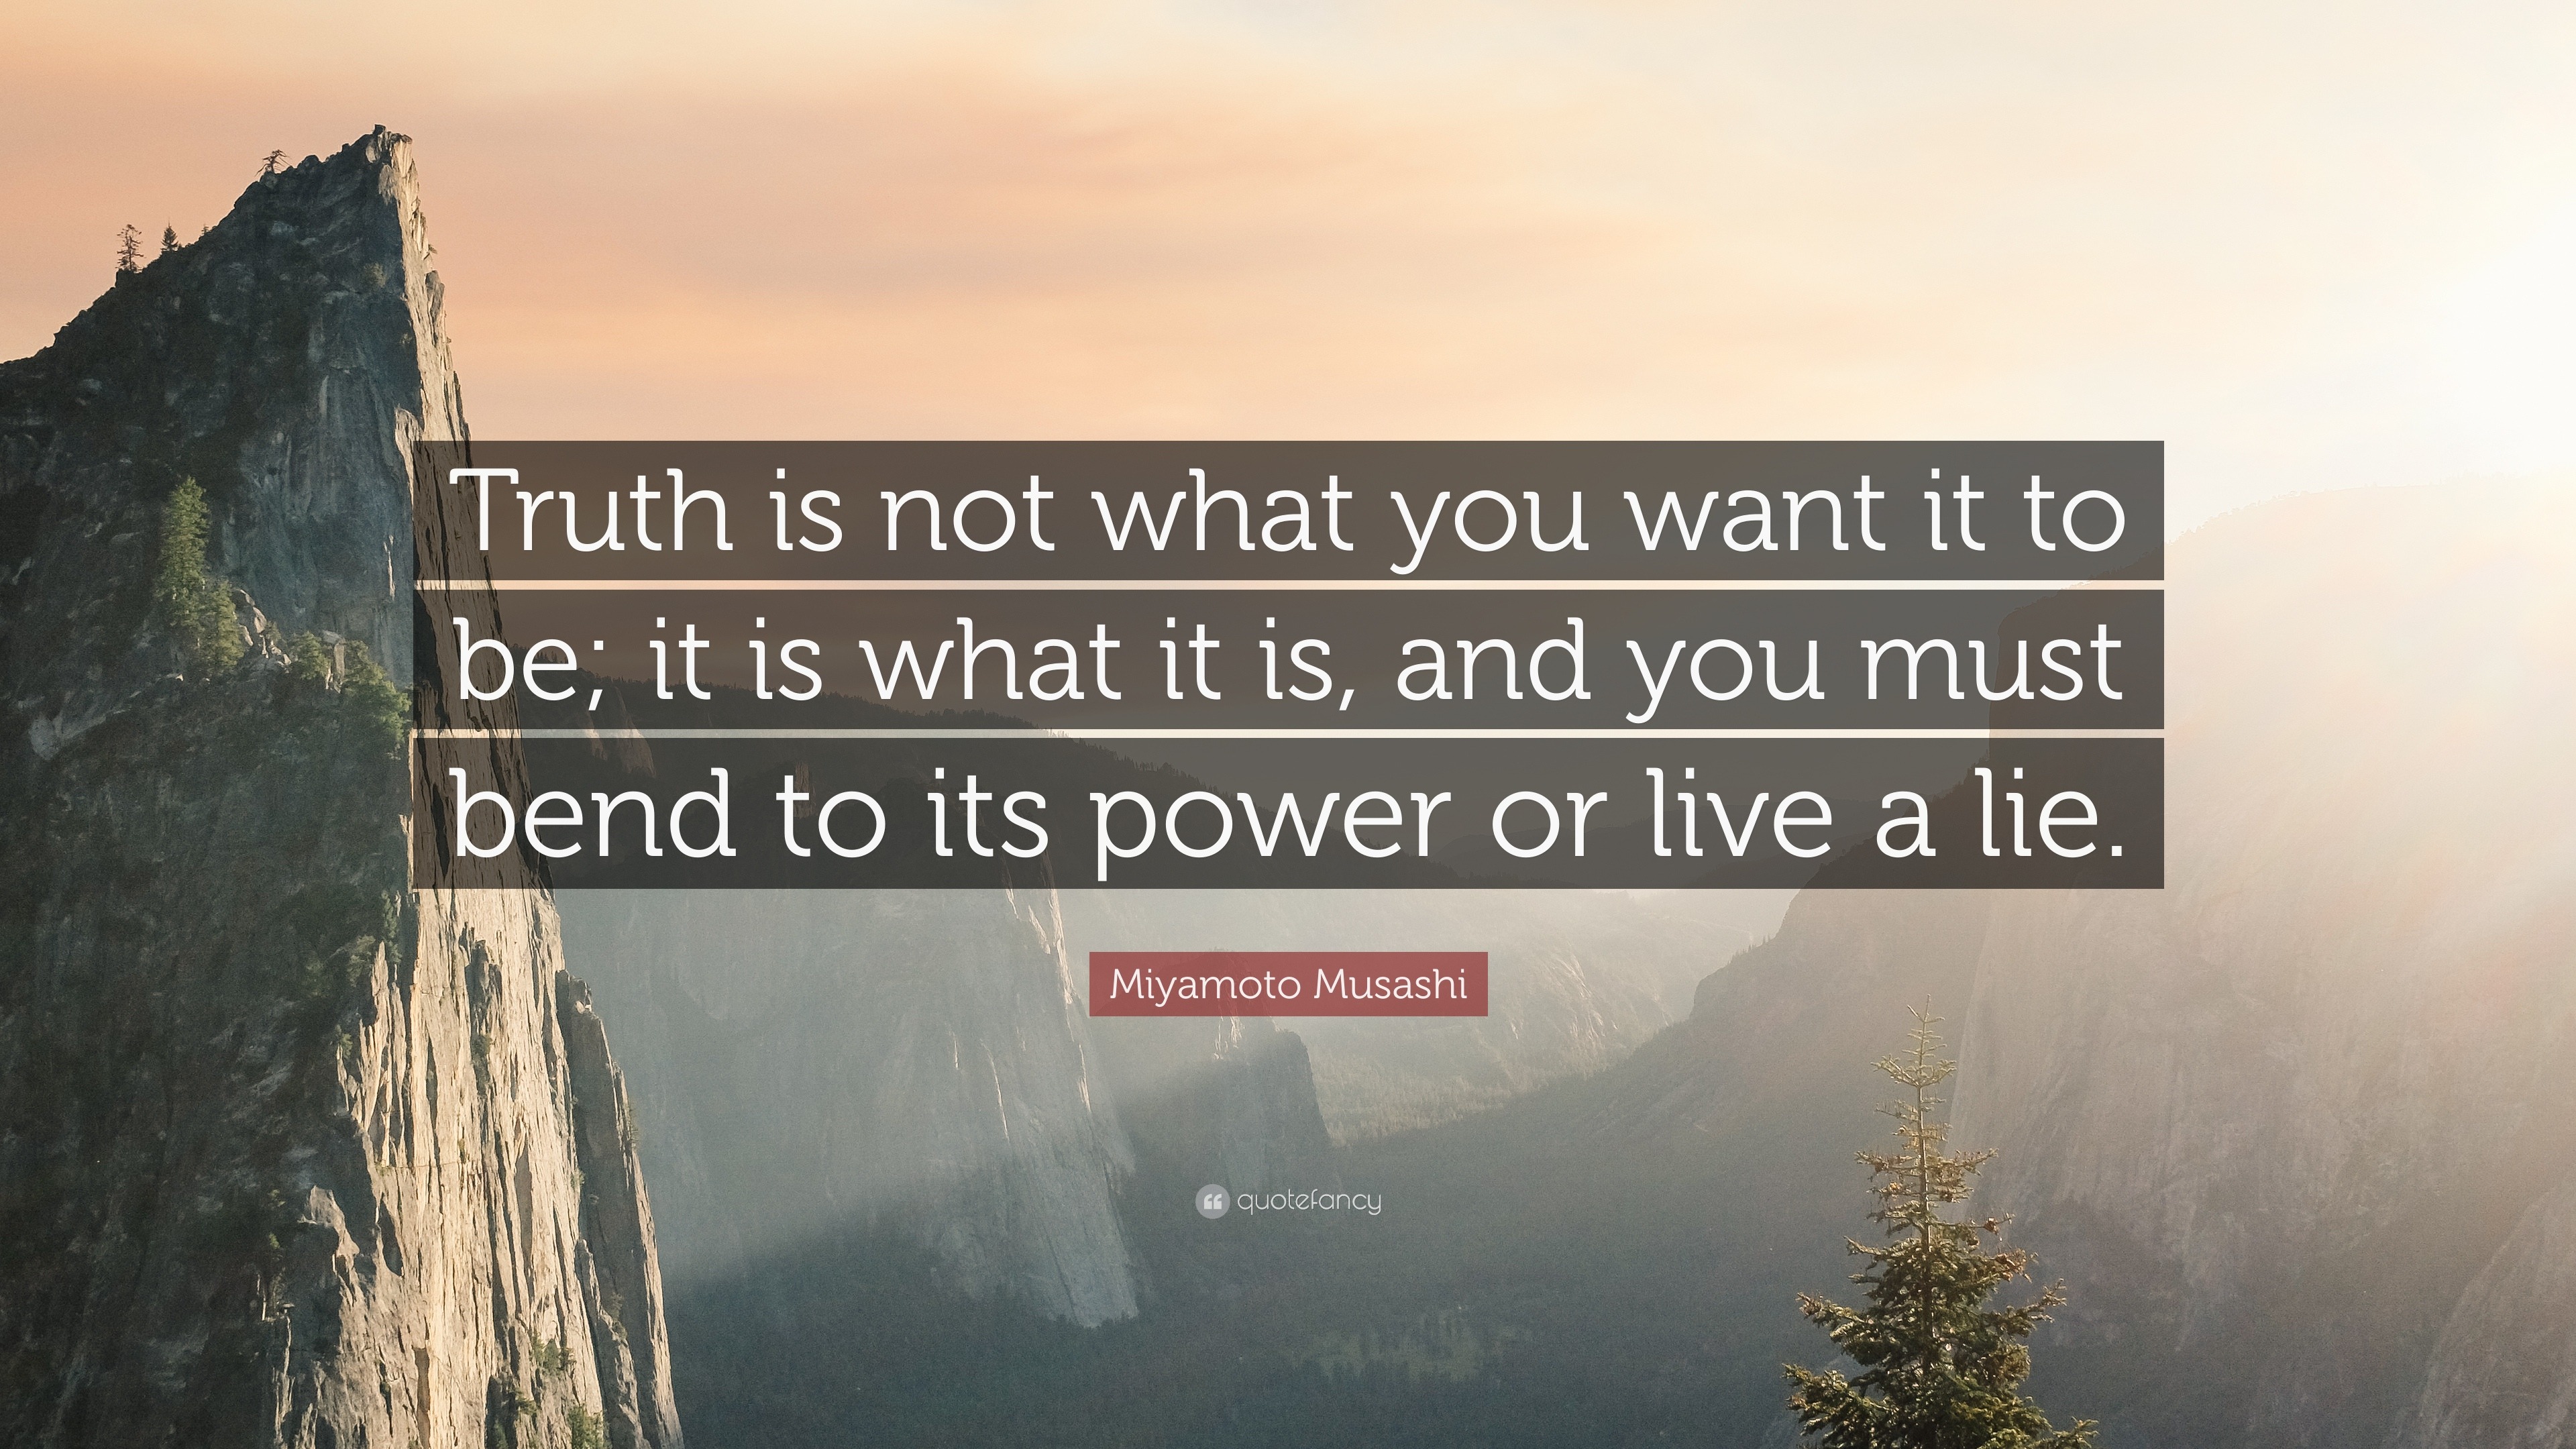 Miyamoto Musashi Quote: “Truth is not what you want it to be; it is